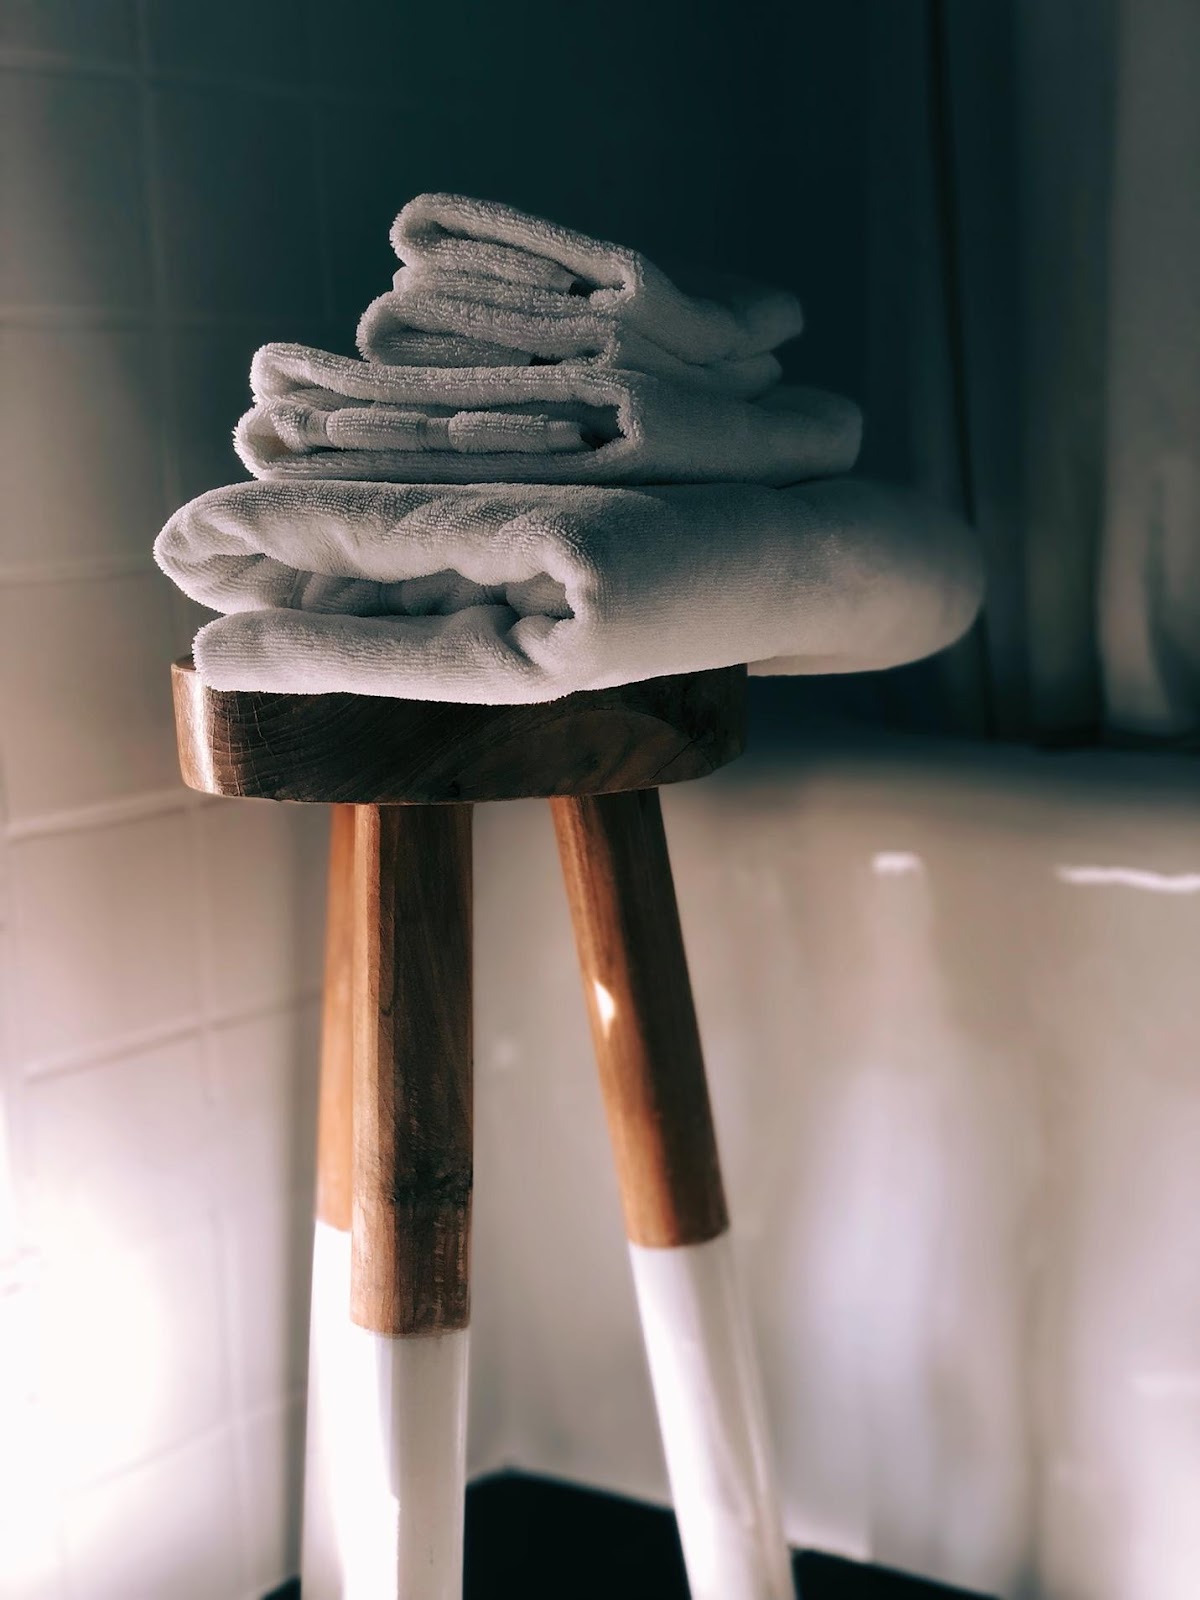 towels on a stool in the bathroom